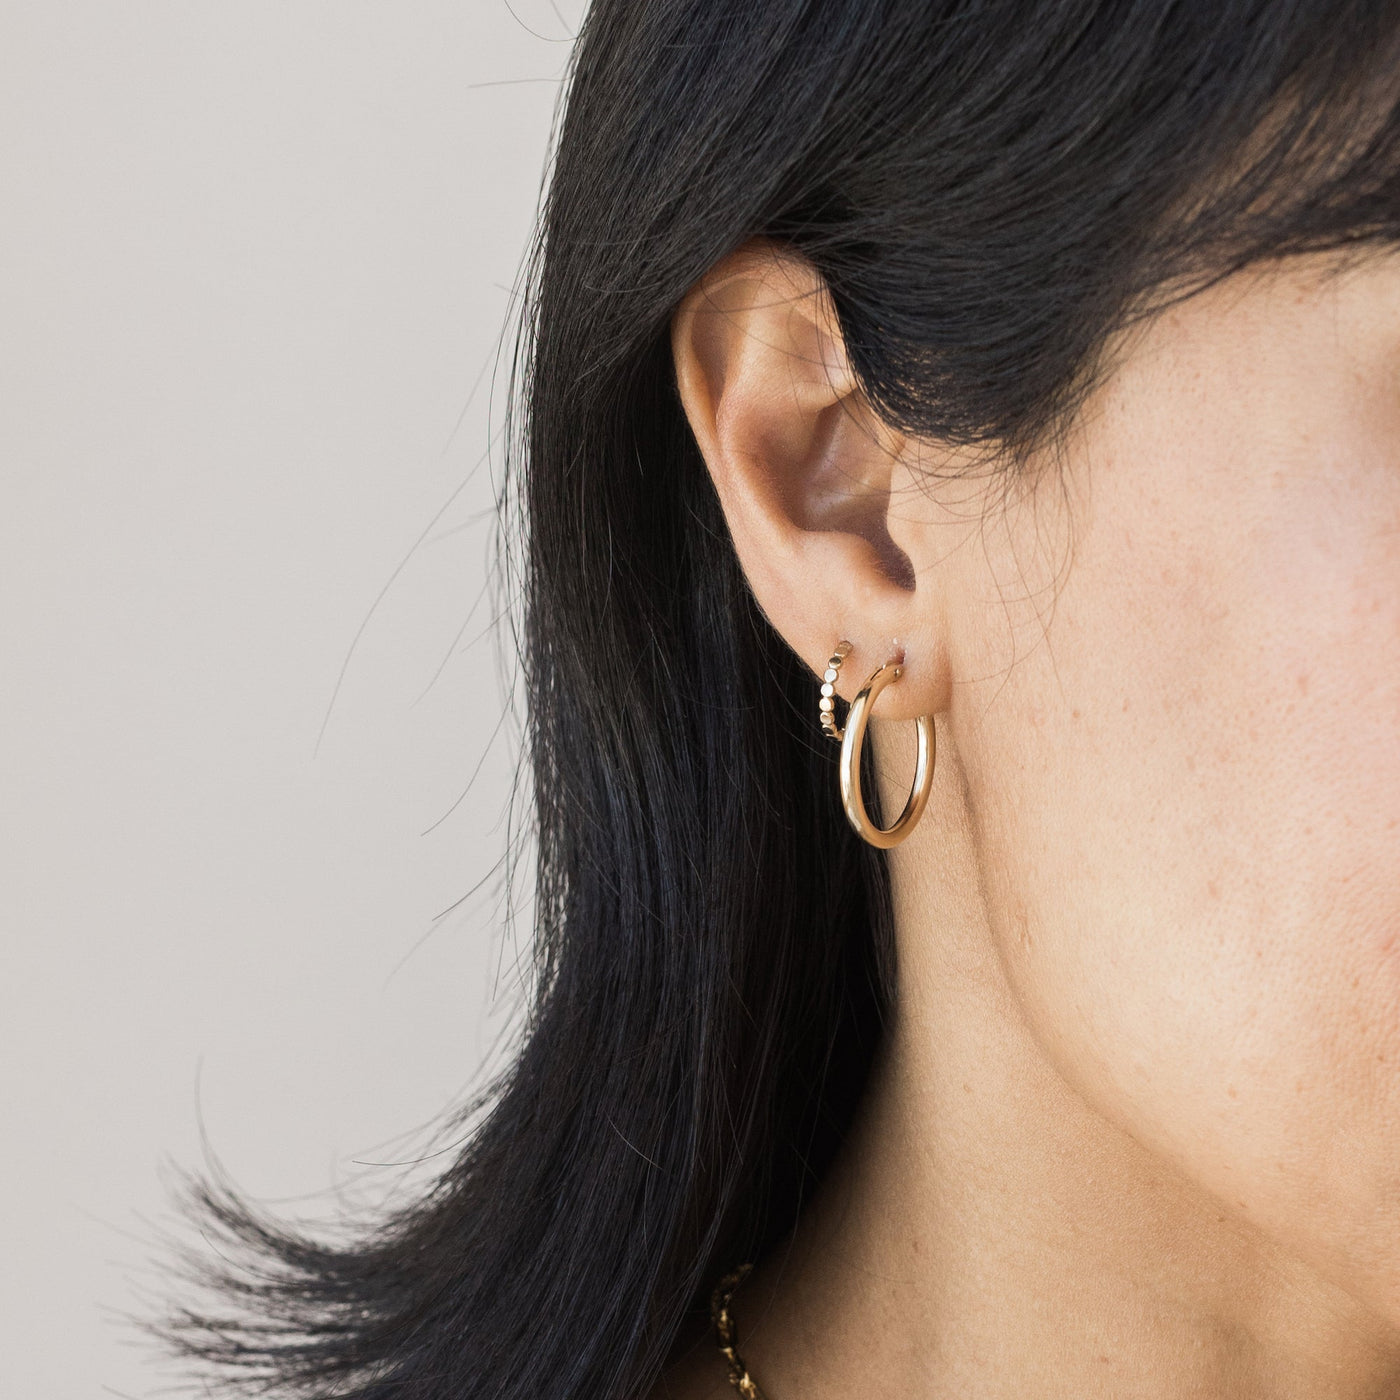 Small Hoop Earrings Perfect For Everyday Wear